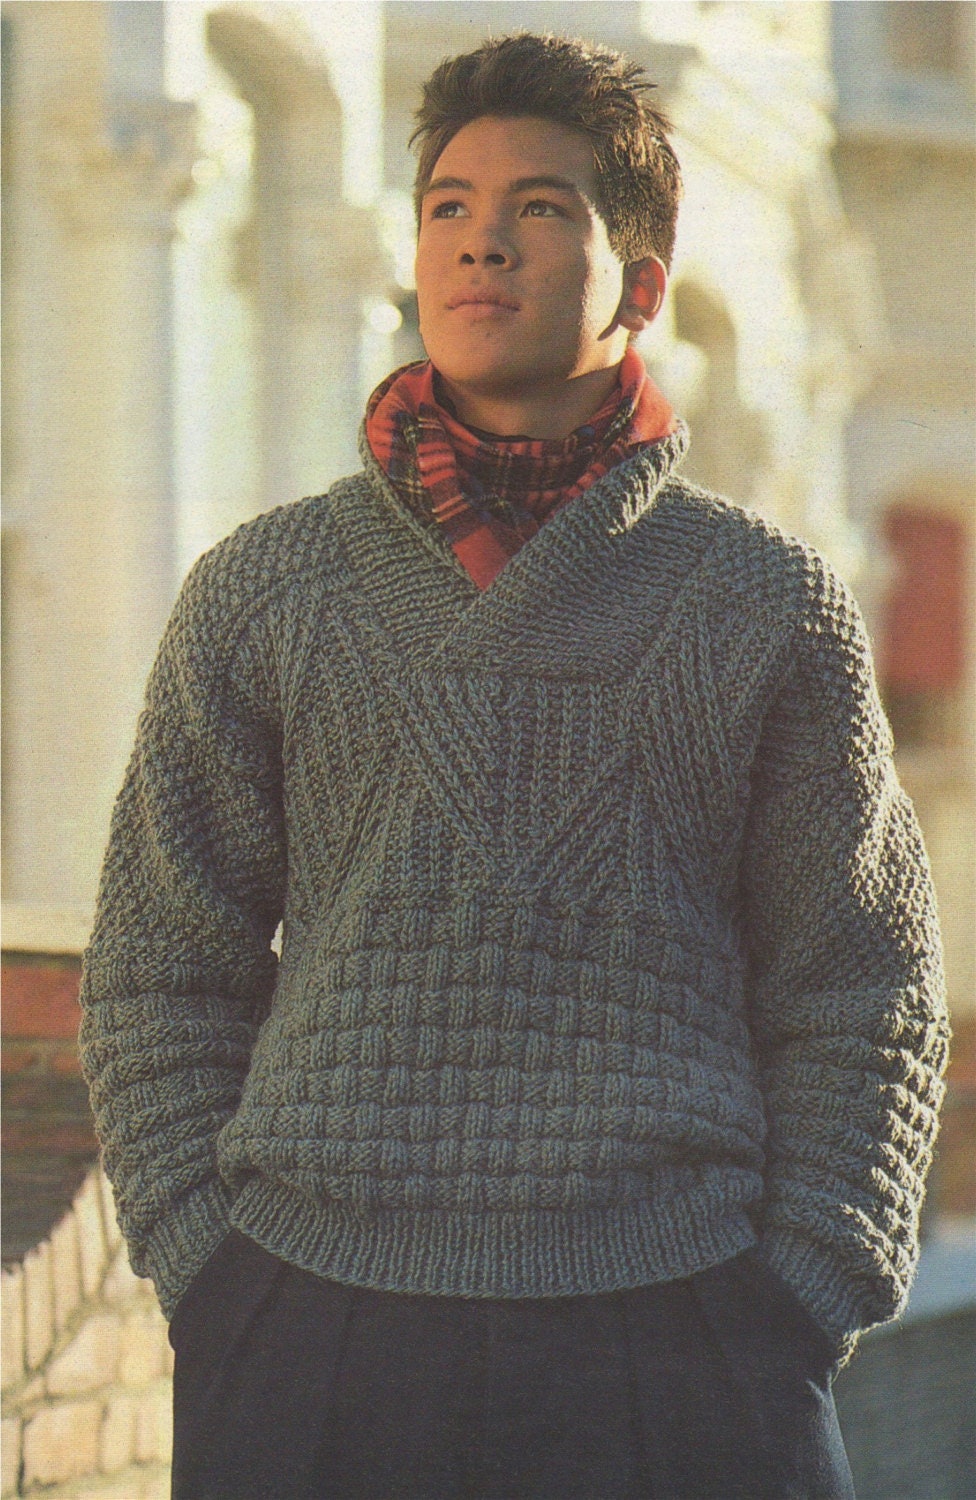 Mens Sweater Knitting Pattern Pdf With Shawl Collar Mans 32 34 And 36 38 Inch Chest Patterned Jumper Chunky Yarn Download